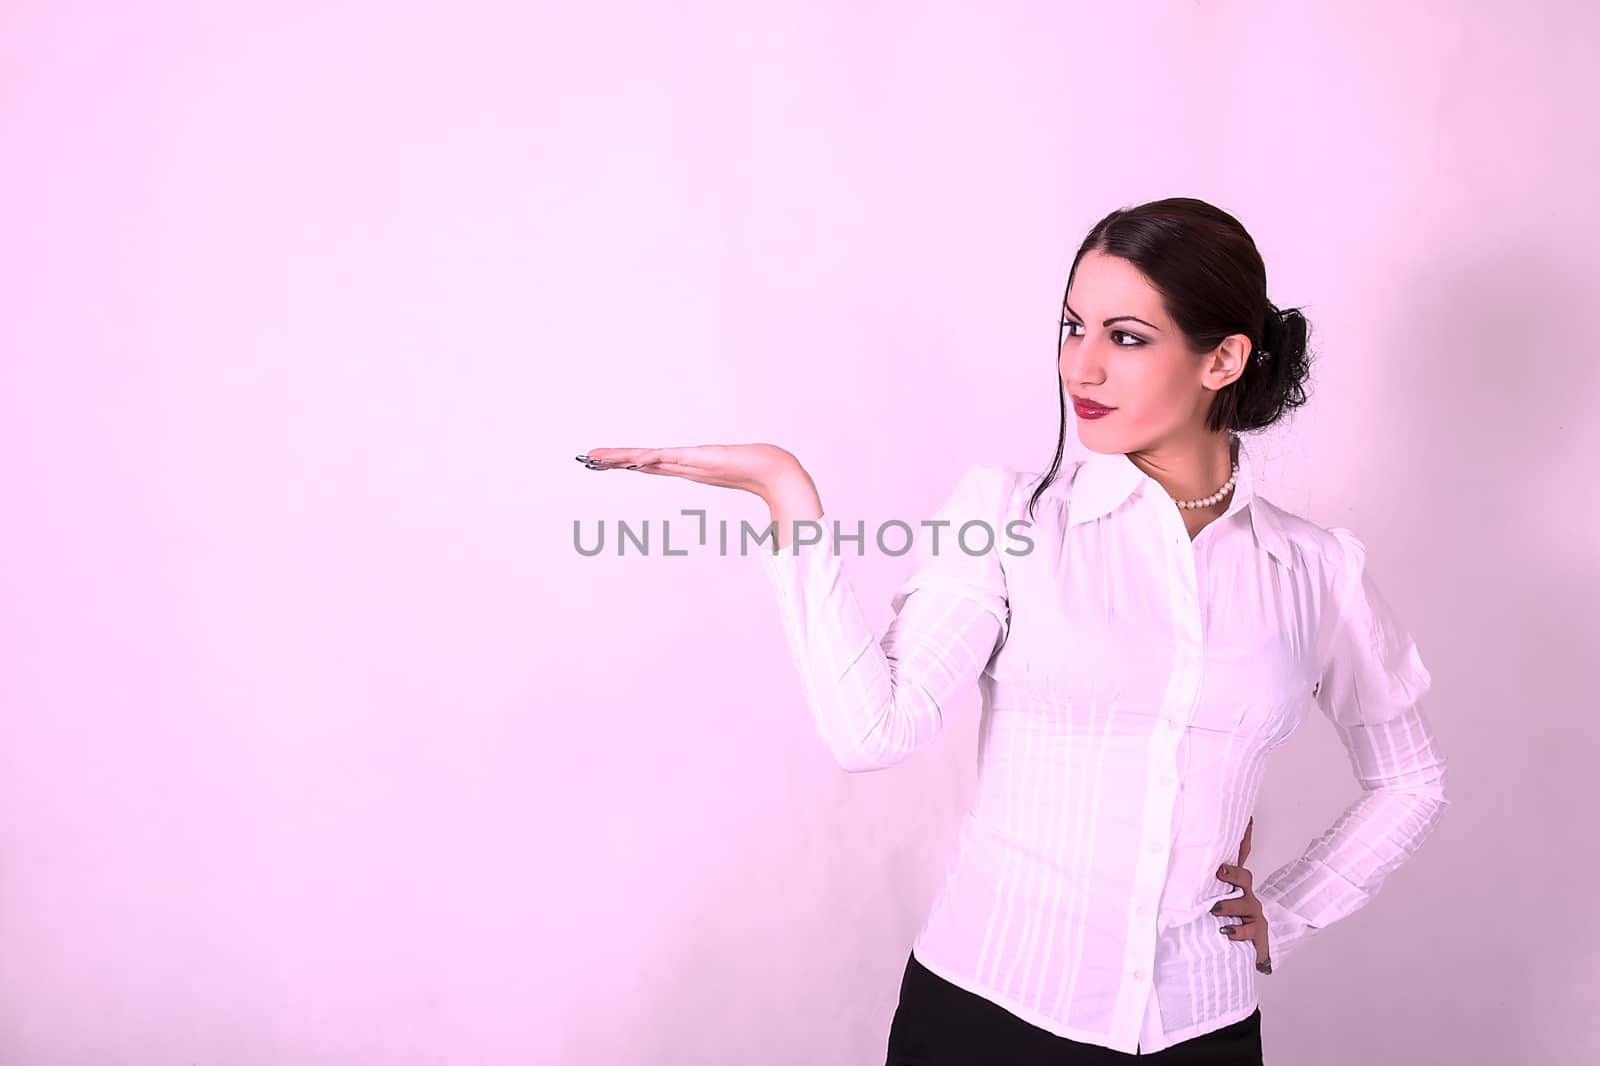 Young woman in business suit shows her empty palm by dukibu